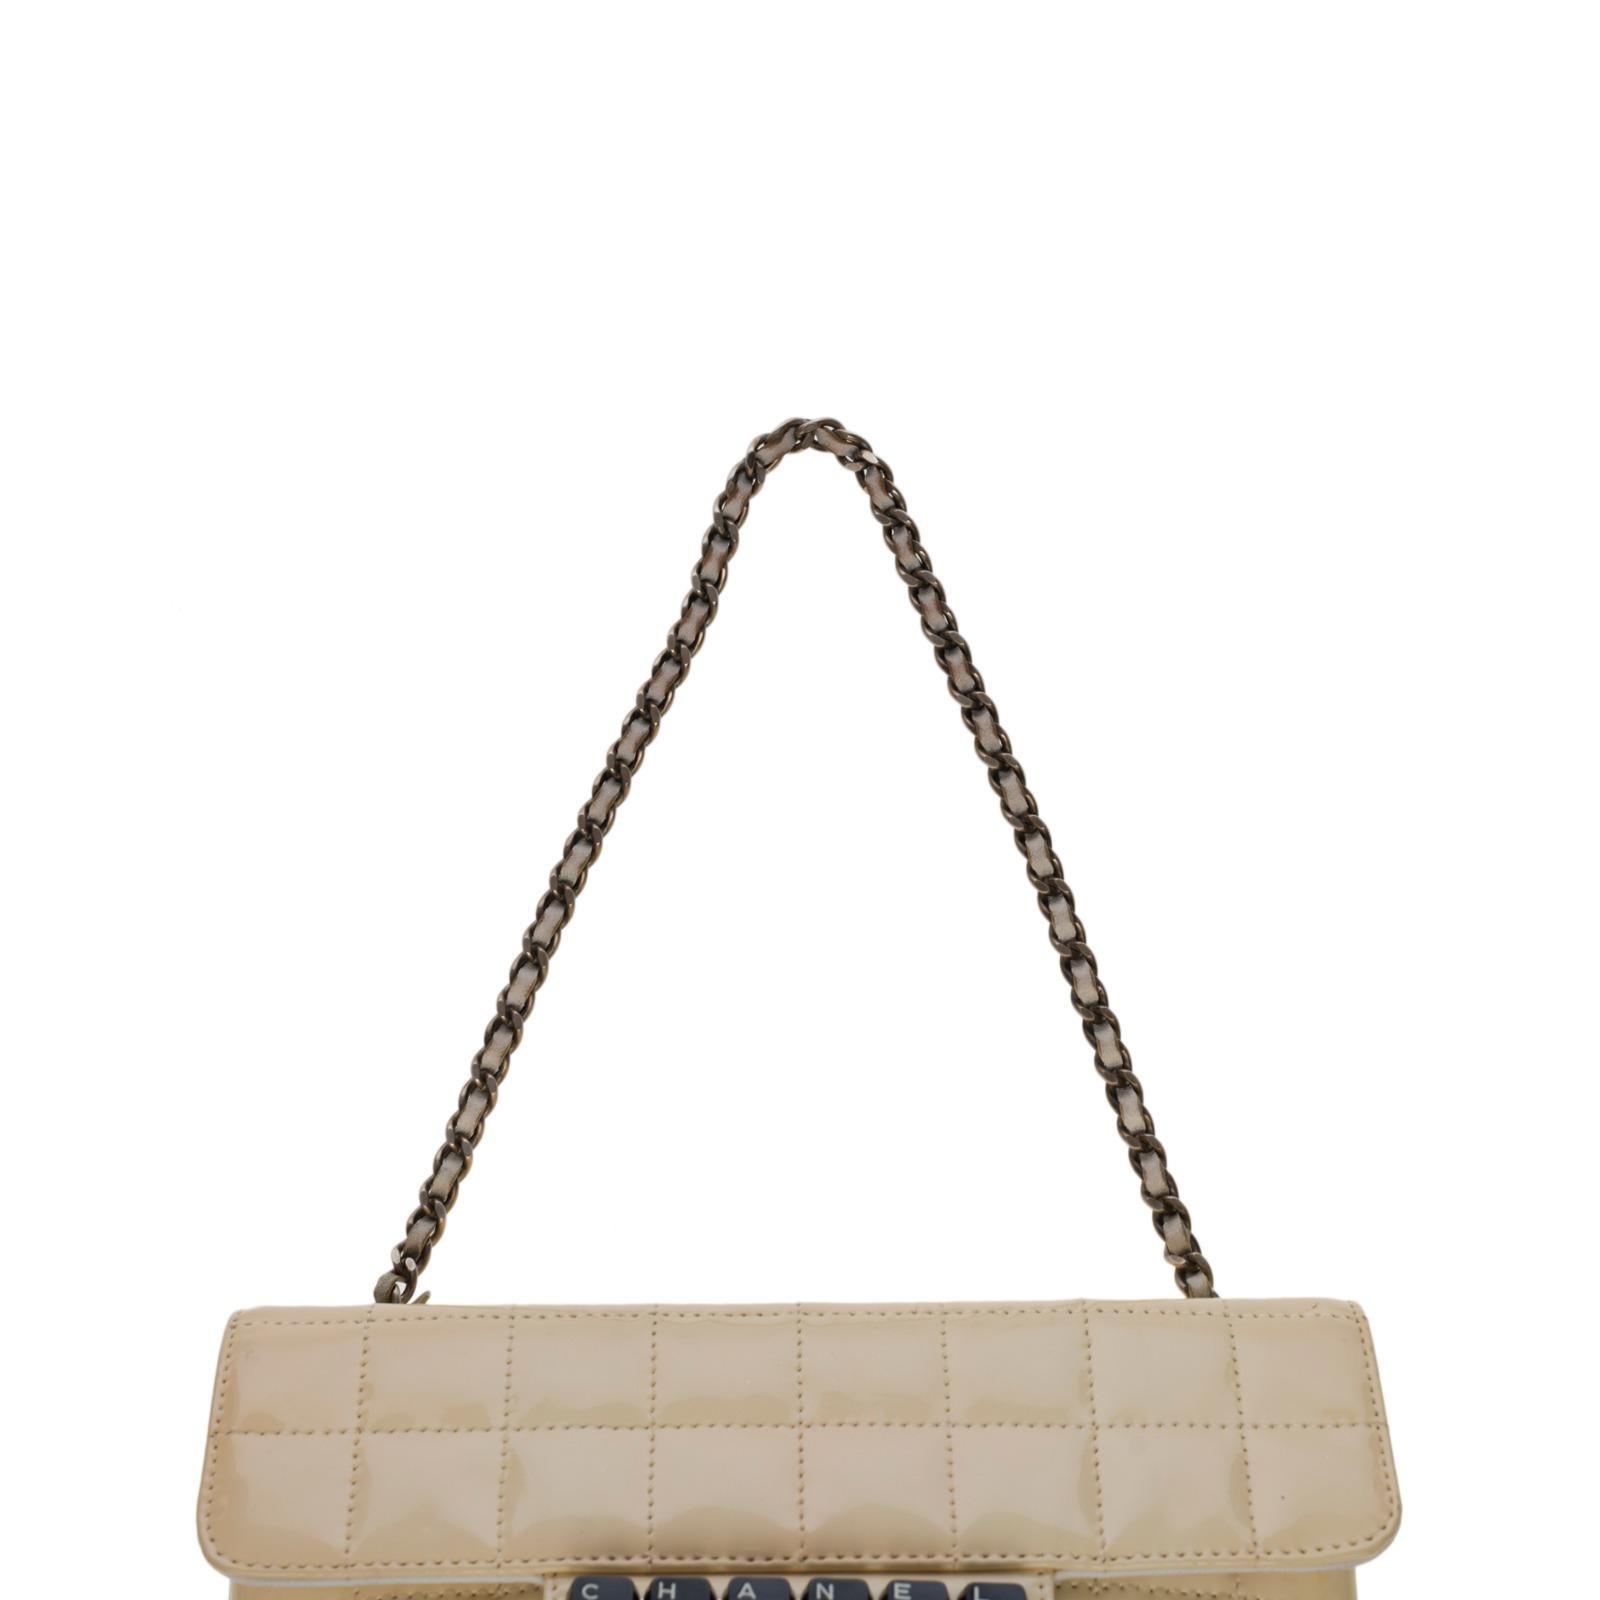 Chanel Chocolate Bar Clavier shoulder bag in beige quilted patent leather, SHW 4